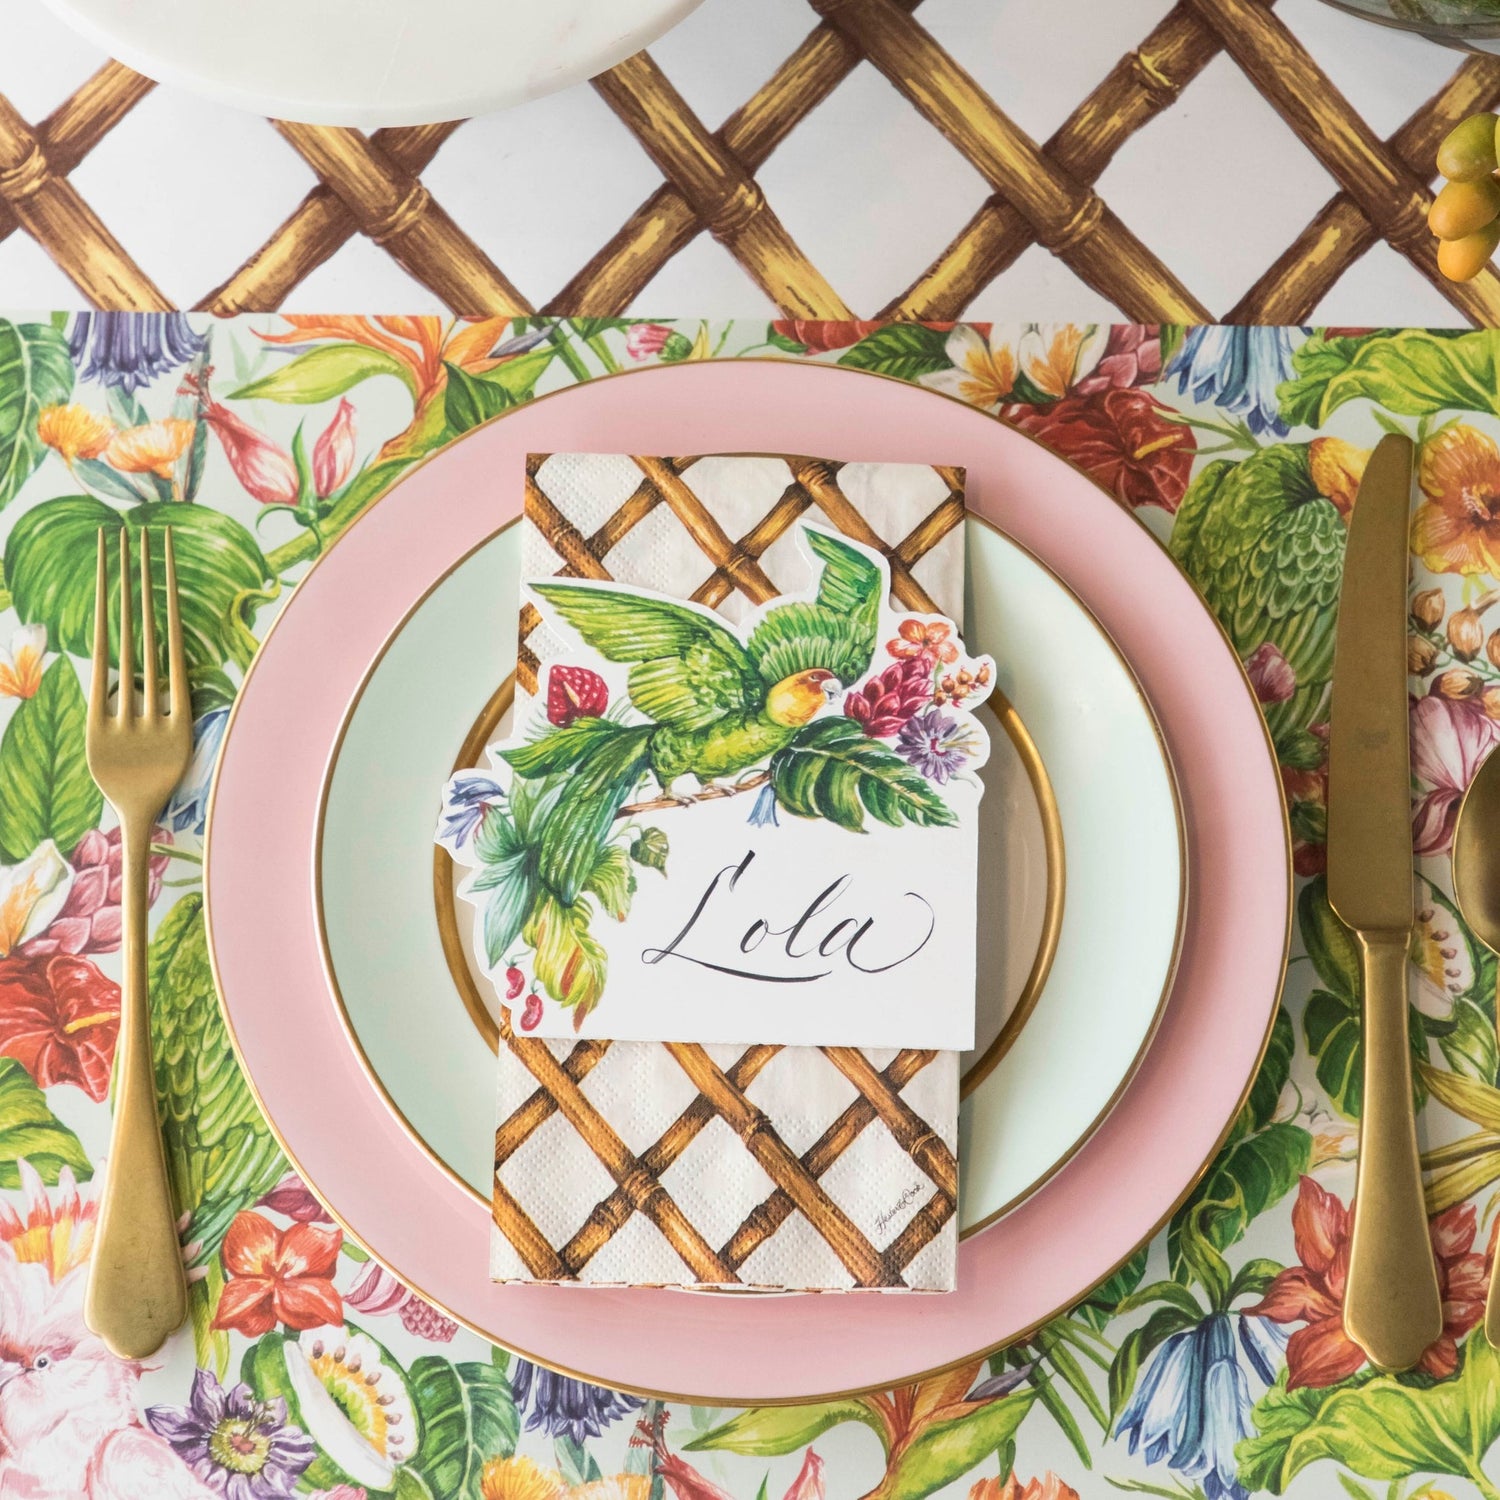 A Birds of Paradise Placemat by Hester &amp; Cook on a pink plate with a Parrot Place Card